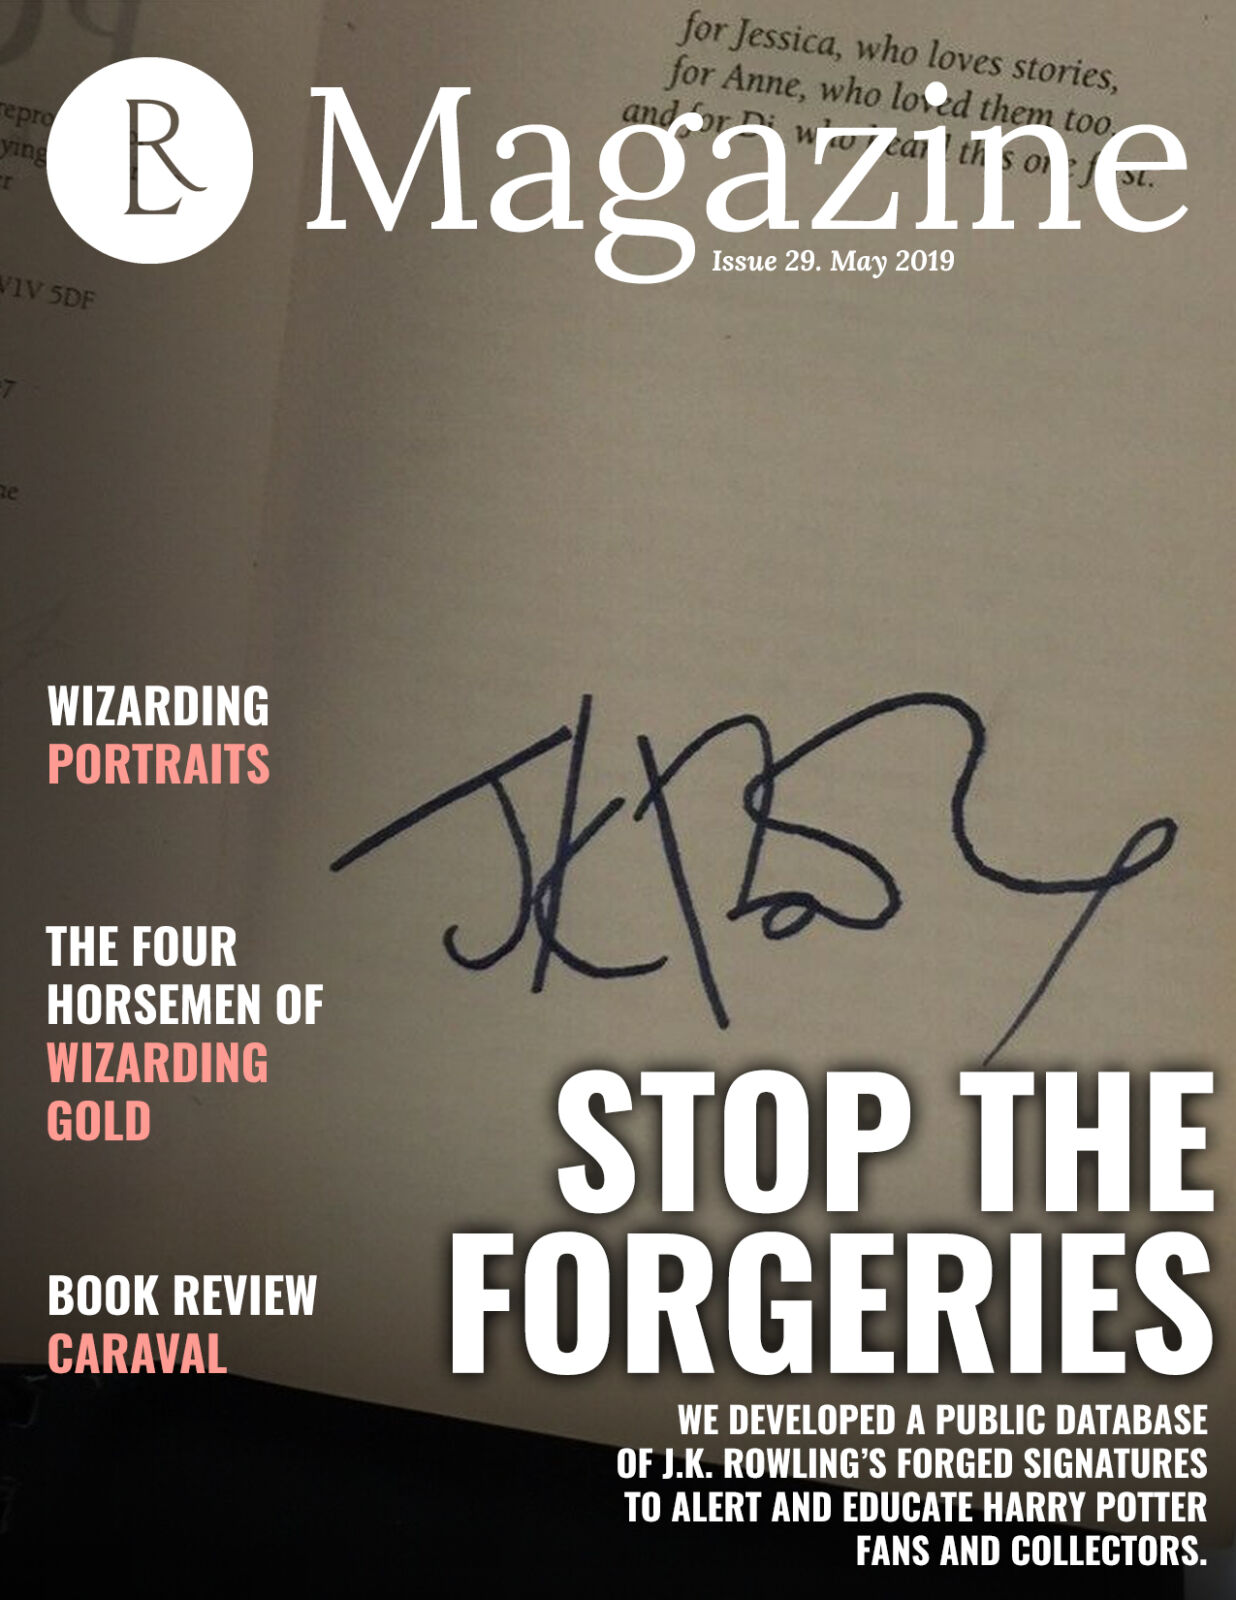 The Rowling Library Magazine #29 (May 2019): Stop the forgeries